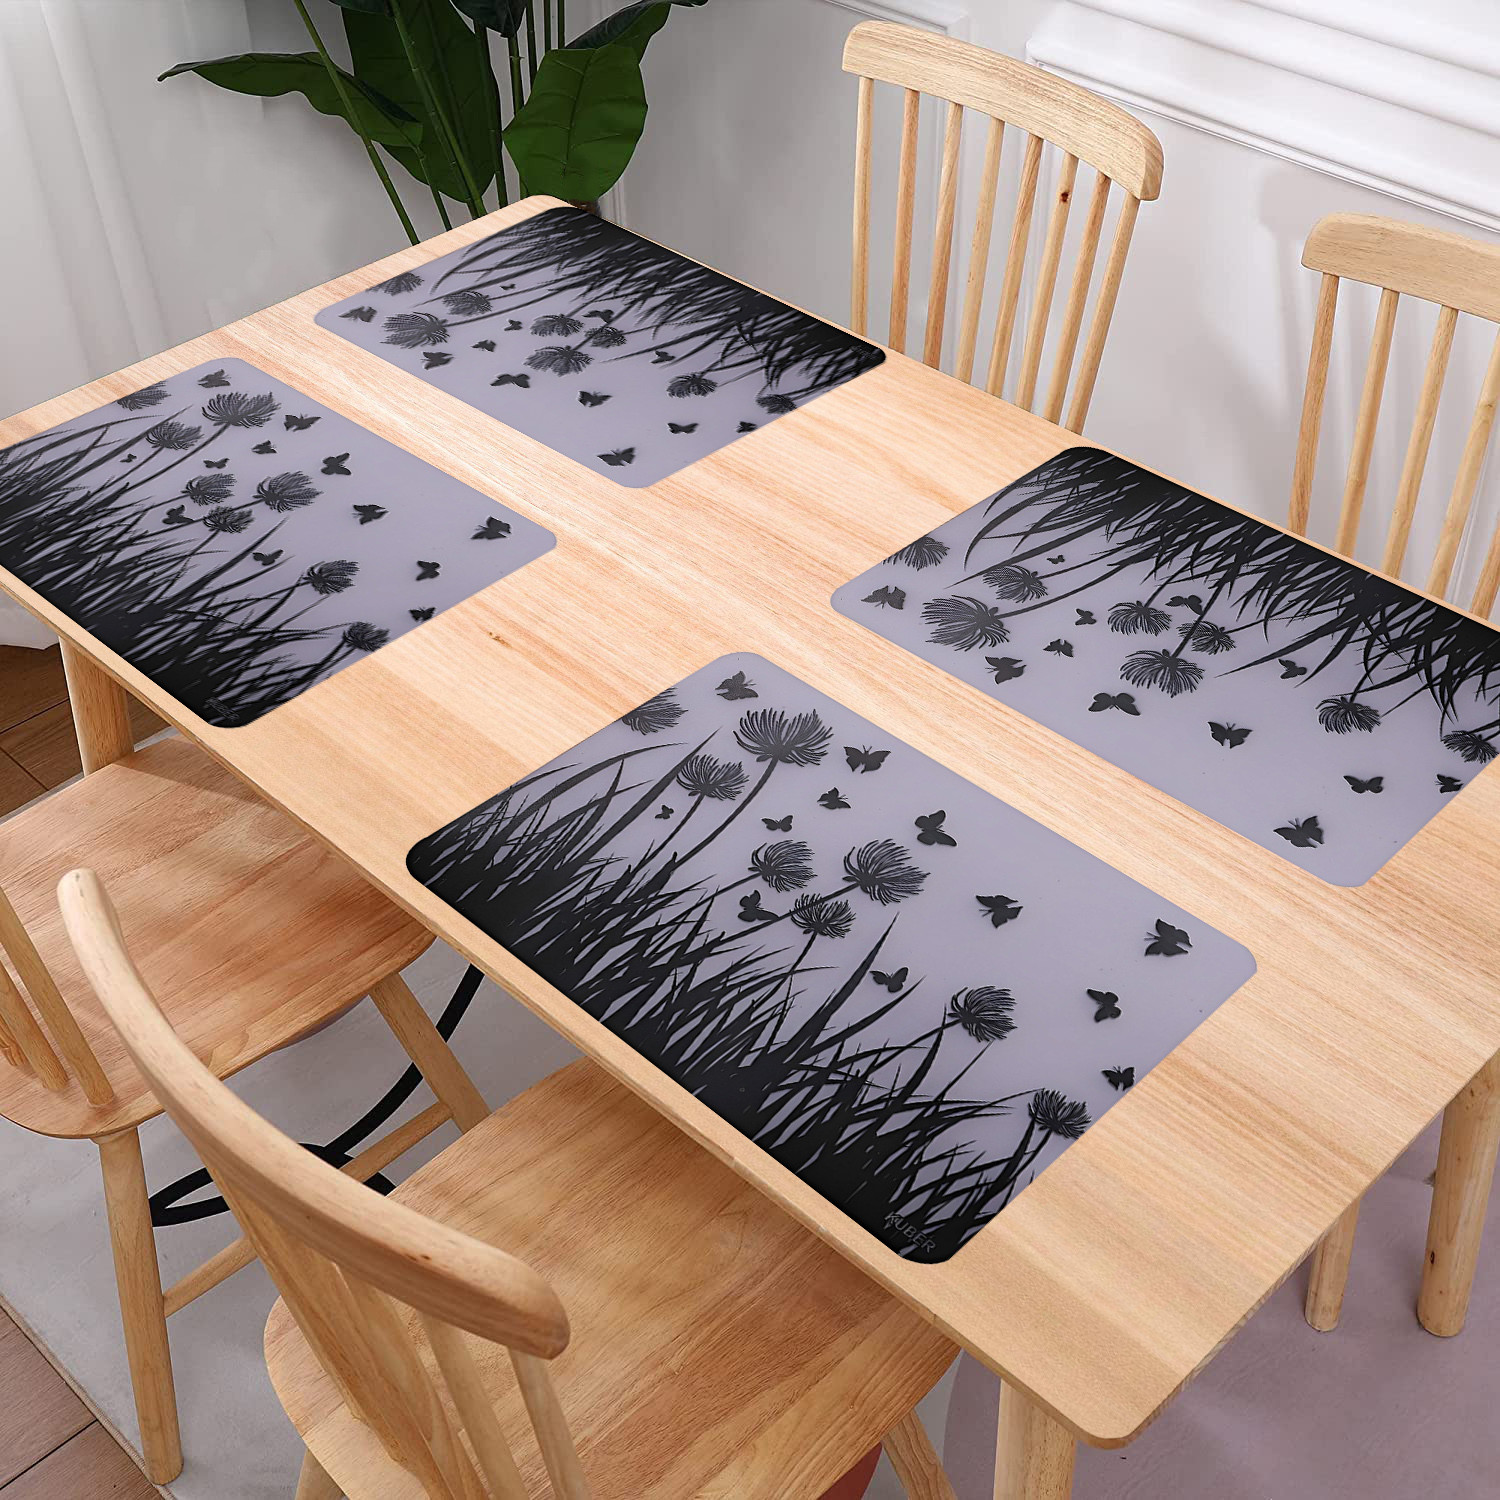 Kuber Industries Dining Table Mat | PVC Butterfly Trees Print | Table Mat | Placemats for Kitchen | Refrigerator Liners Mats | Shelf Liner Mat | Set of 6 | White